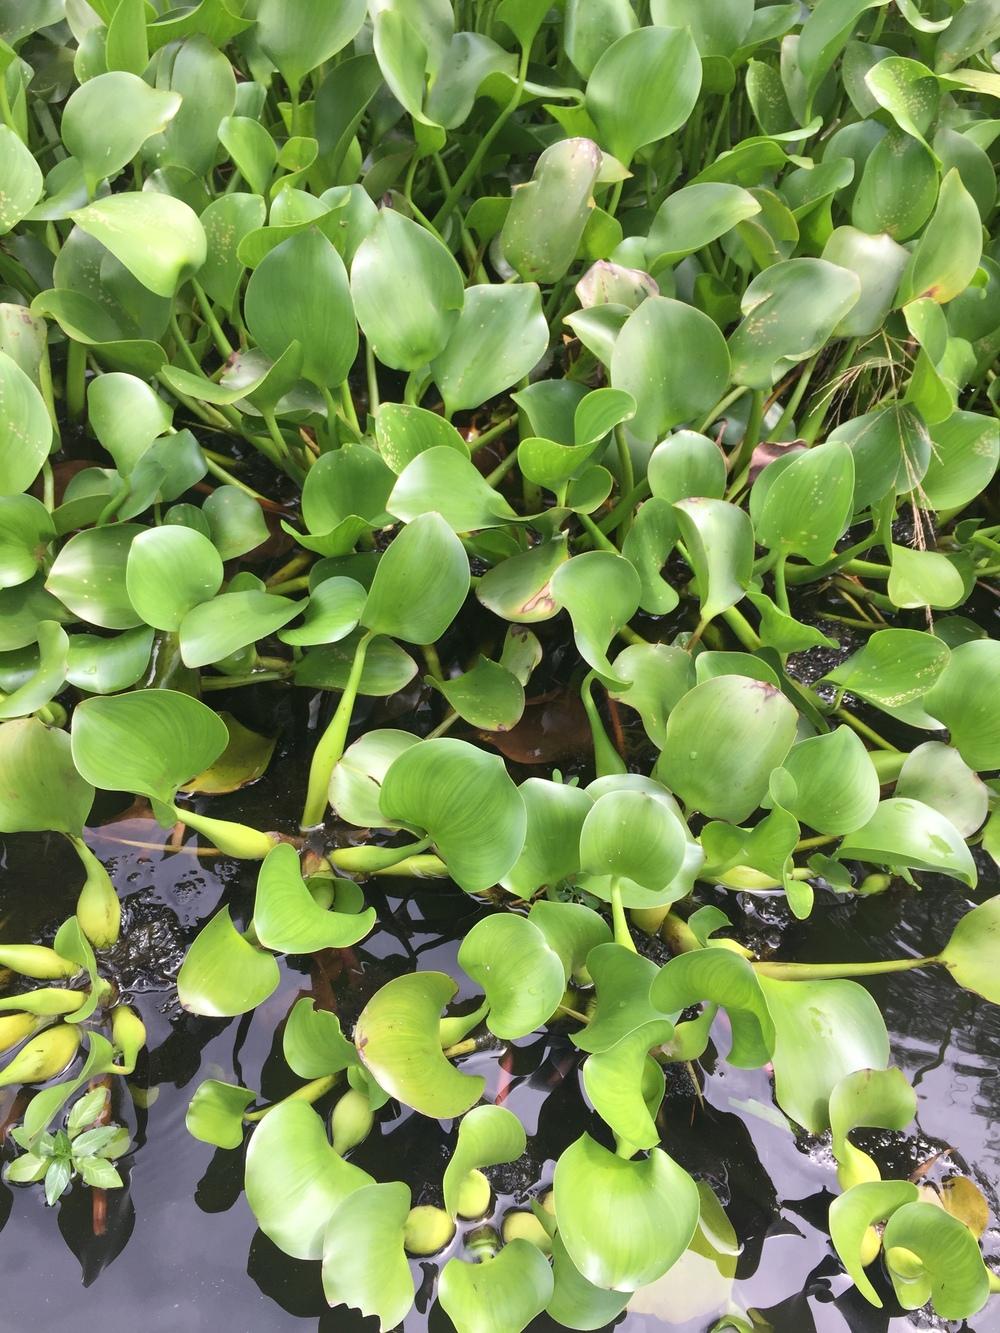 Photo of Water Hyacinth (Eichhornia crassipes) uploaded by WhistlingWisteria